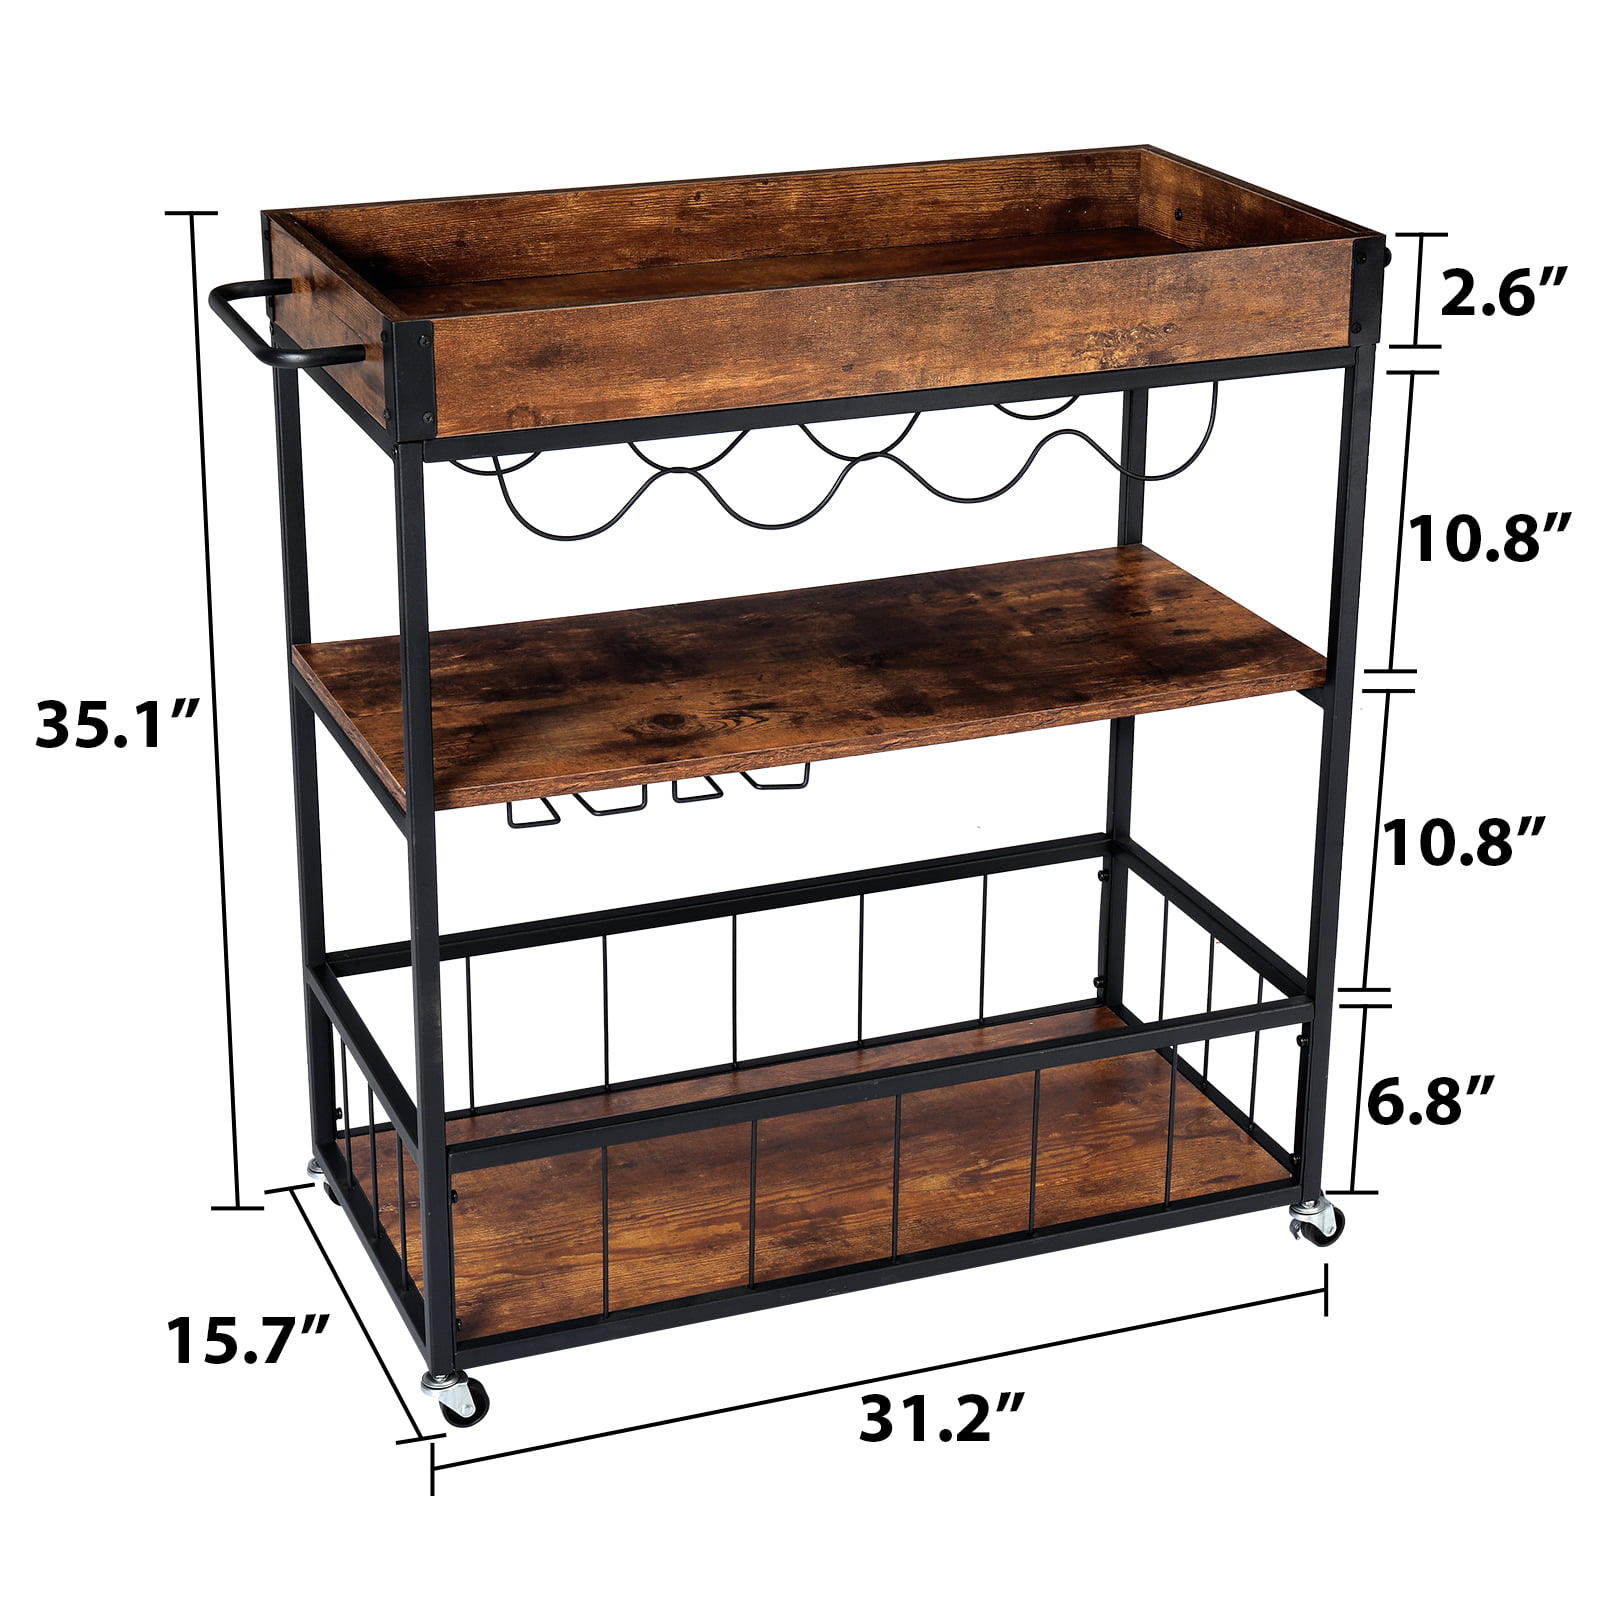 Hencawima Coffee Bar Cabinet, 3 Tier Coffee Station Table on Wheels, 35.9  H Bar Cart with Wire Basket Drawer & 5 Hooks for Home Kitchen, Liquor